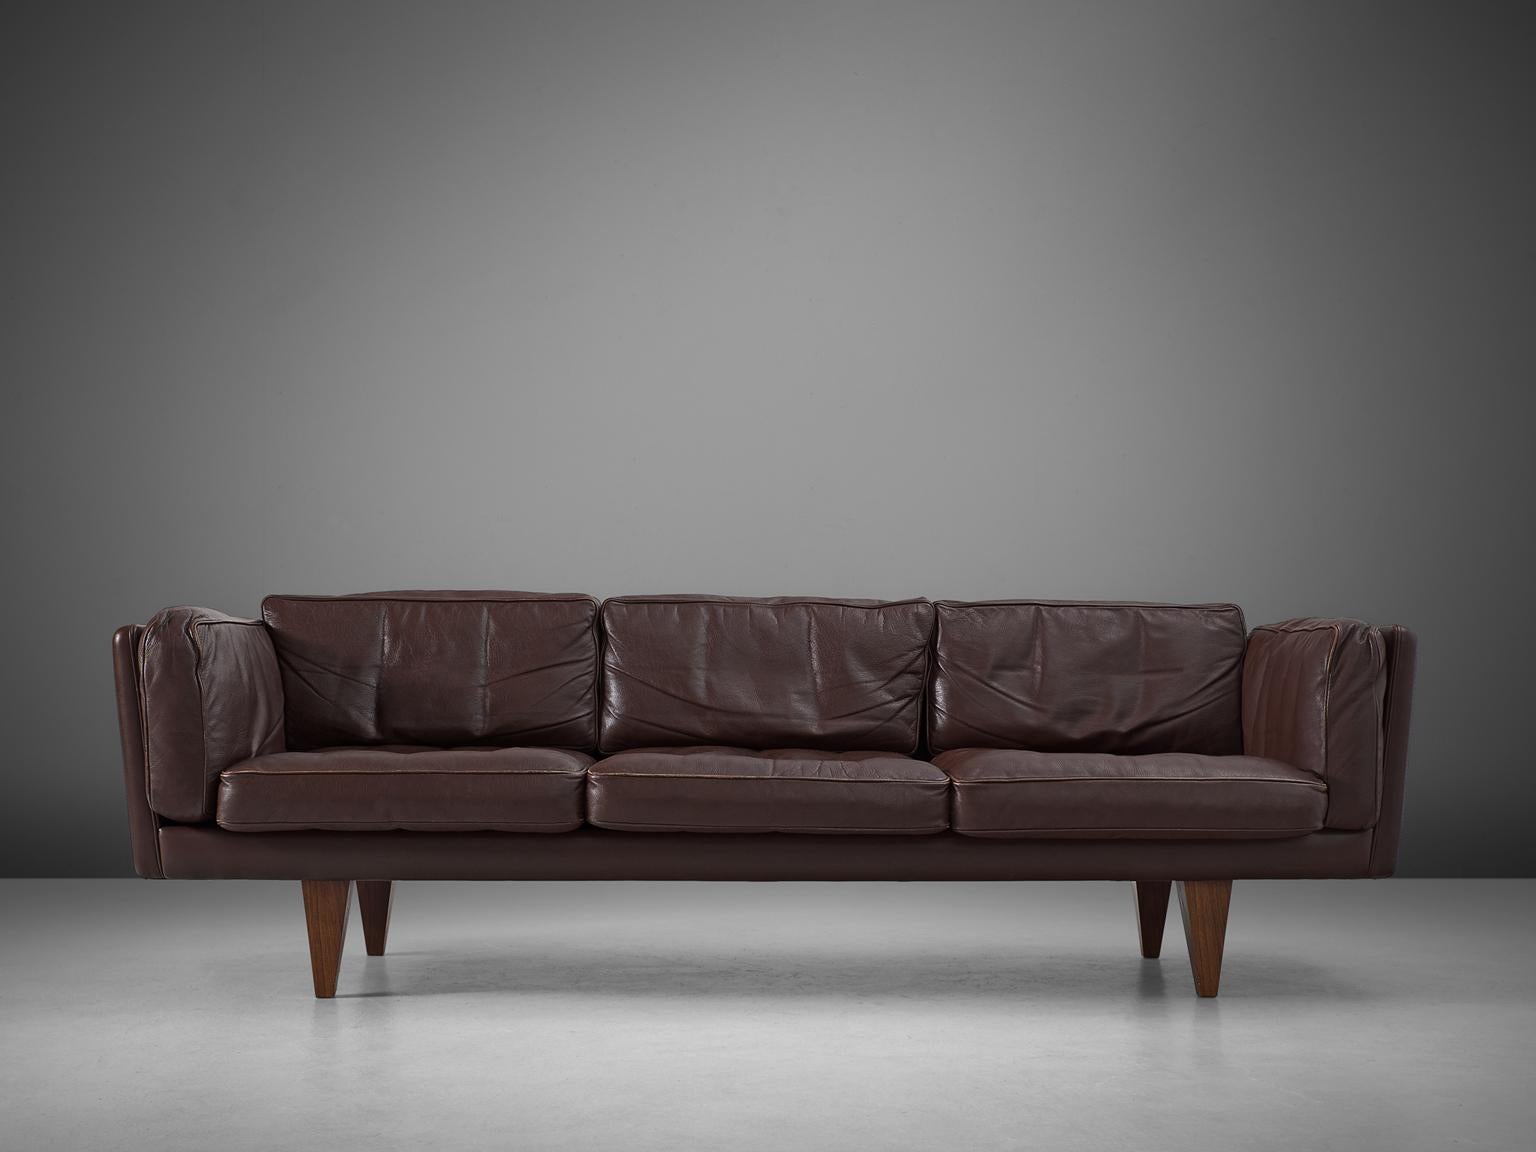 Illum Wikkelsø, sofa model V11, dark brown leather and wood, Denmark, 1960s.

Stunningly three-seat sofa, designed by Danish designer Illum Wikkelsø. Highly comfortable and beautiful designed sofa with brown leather upholstery. The nonchalant and